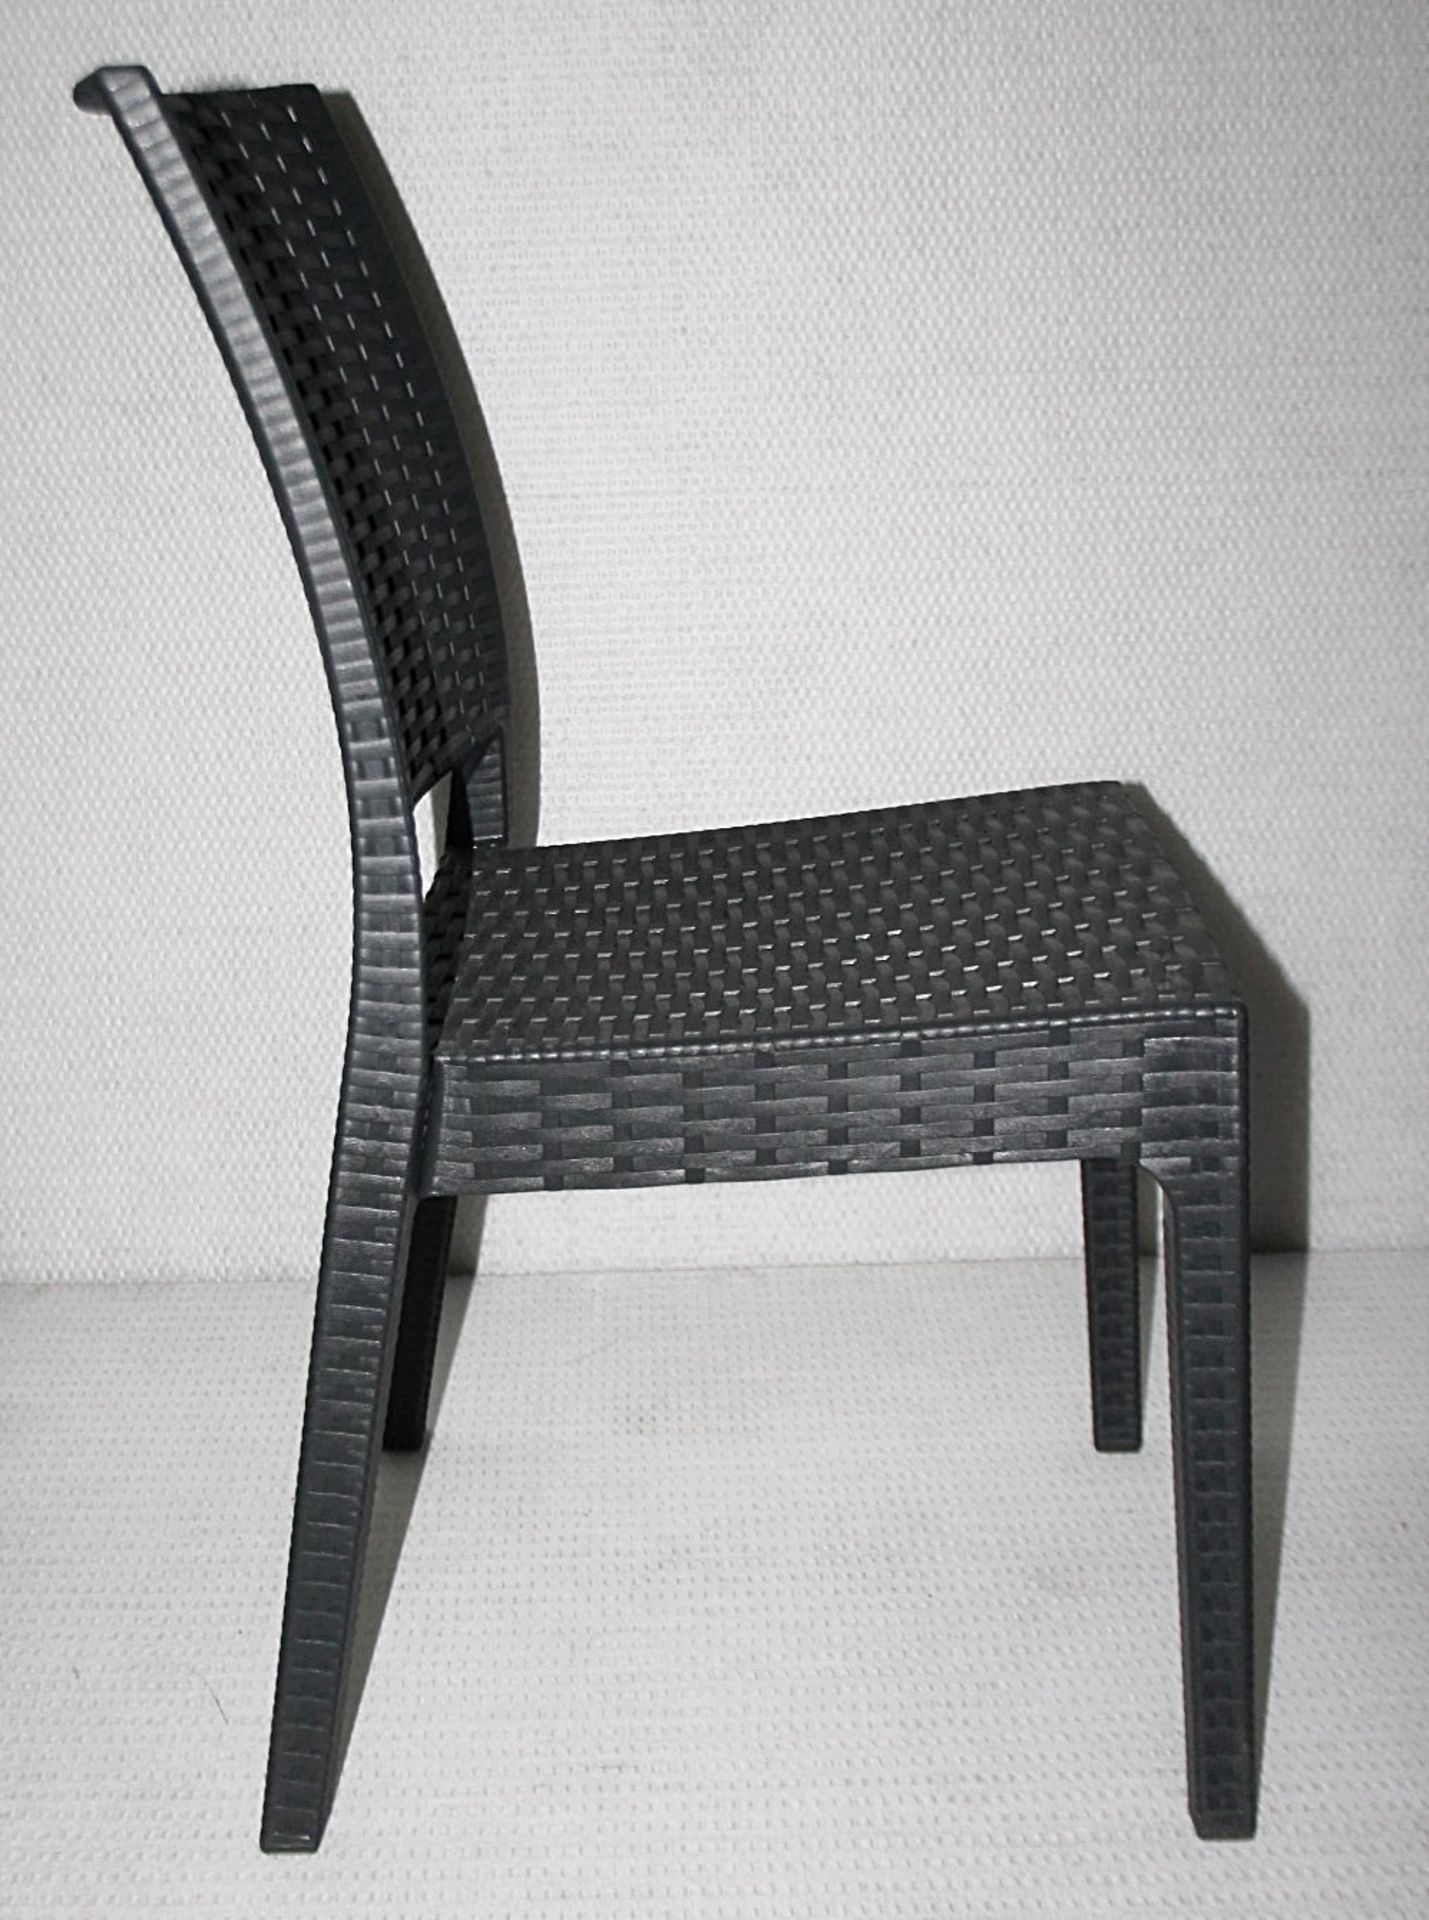 8 x SIESTA EXCLUSIVE 'Florida' Commercial Stackable Rattan-style Chairs In Dark Grey -CL987 - - Image 10 of 13